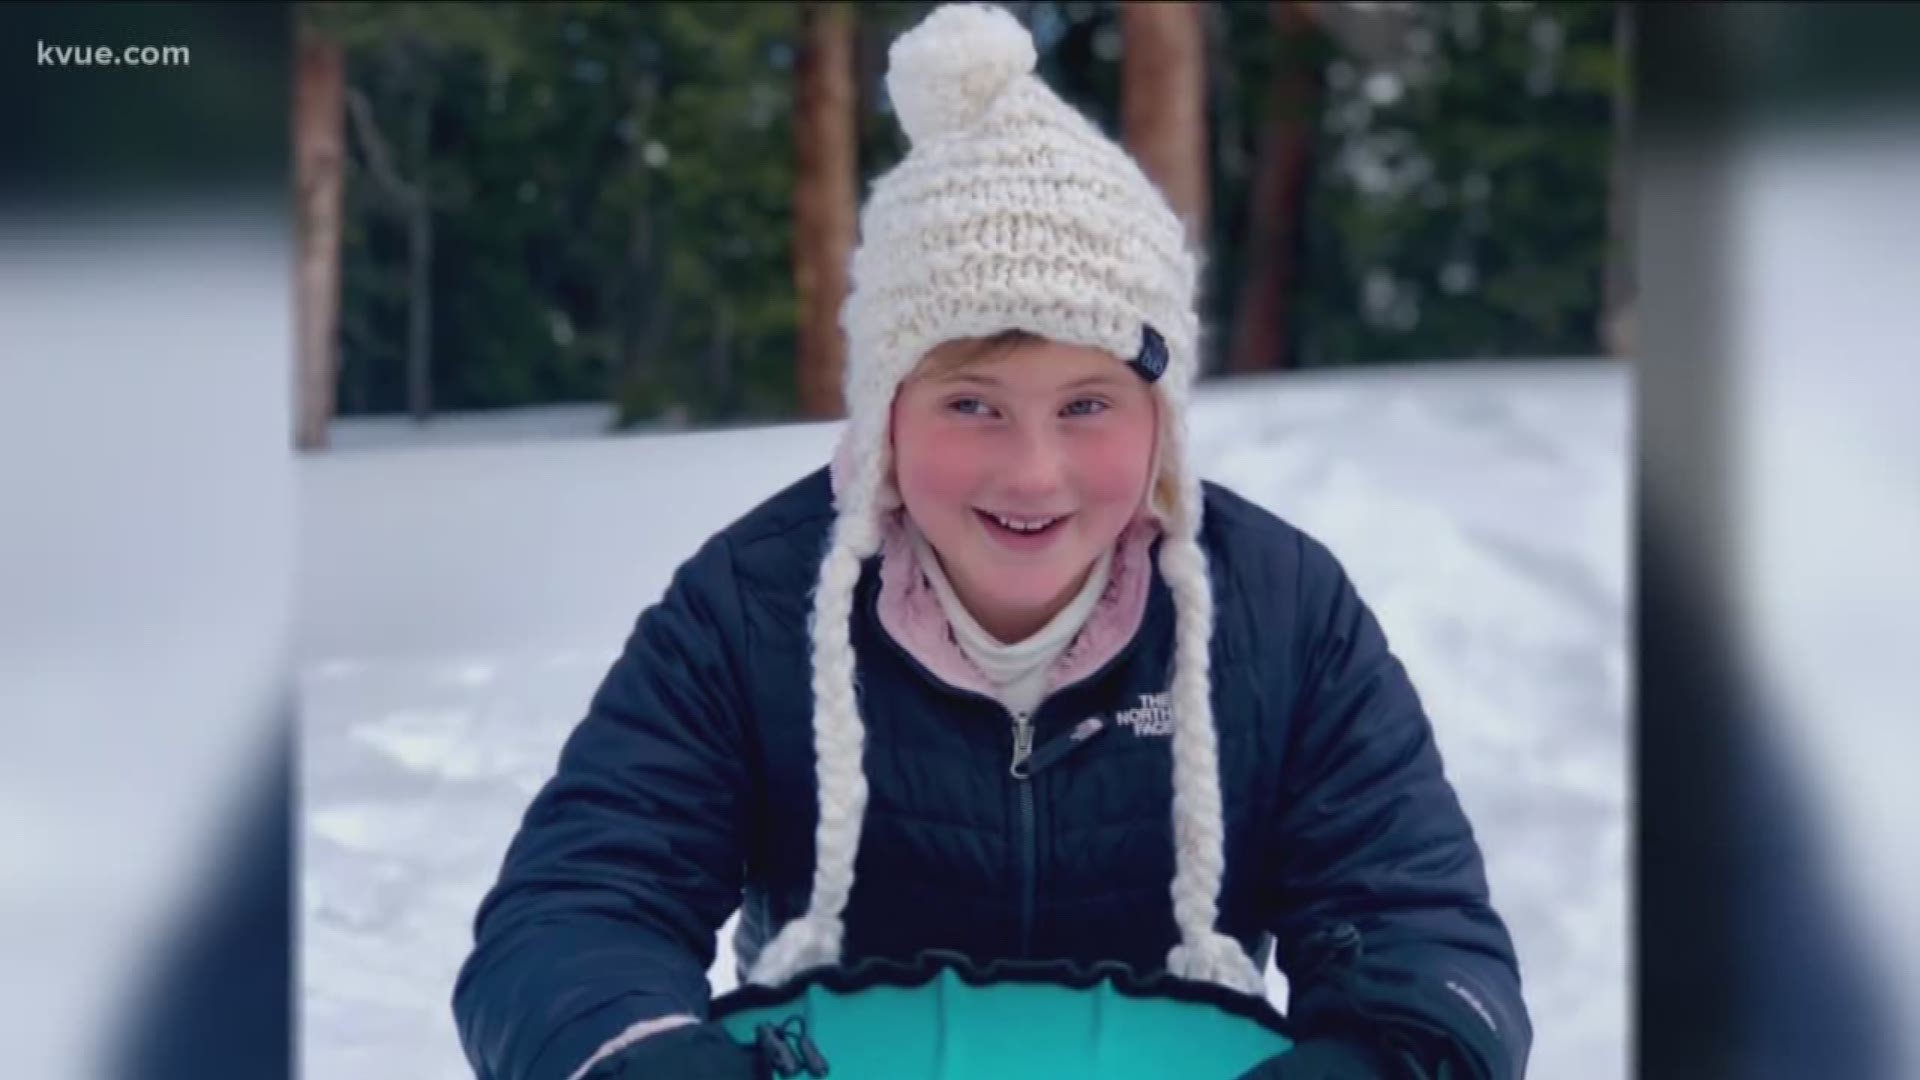 Earlier this month, the United States Association of Blind Athletes hosted a ski festival in Breckenridge, Colorado. Seventeen visually-impaired people went, including an Austin 13-year-old.